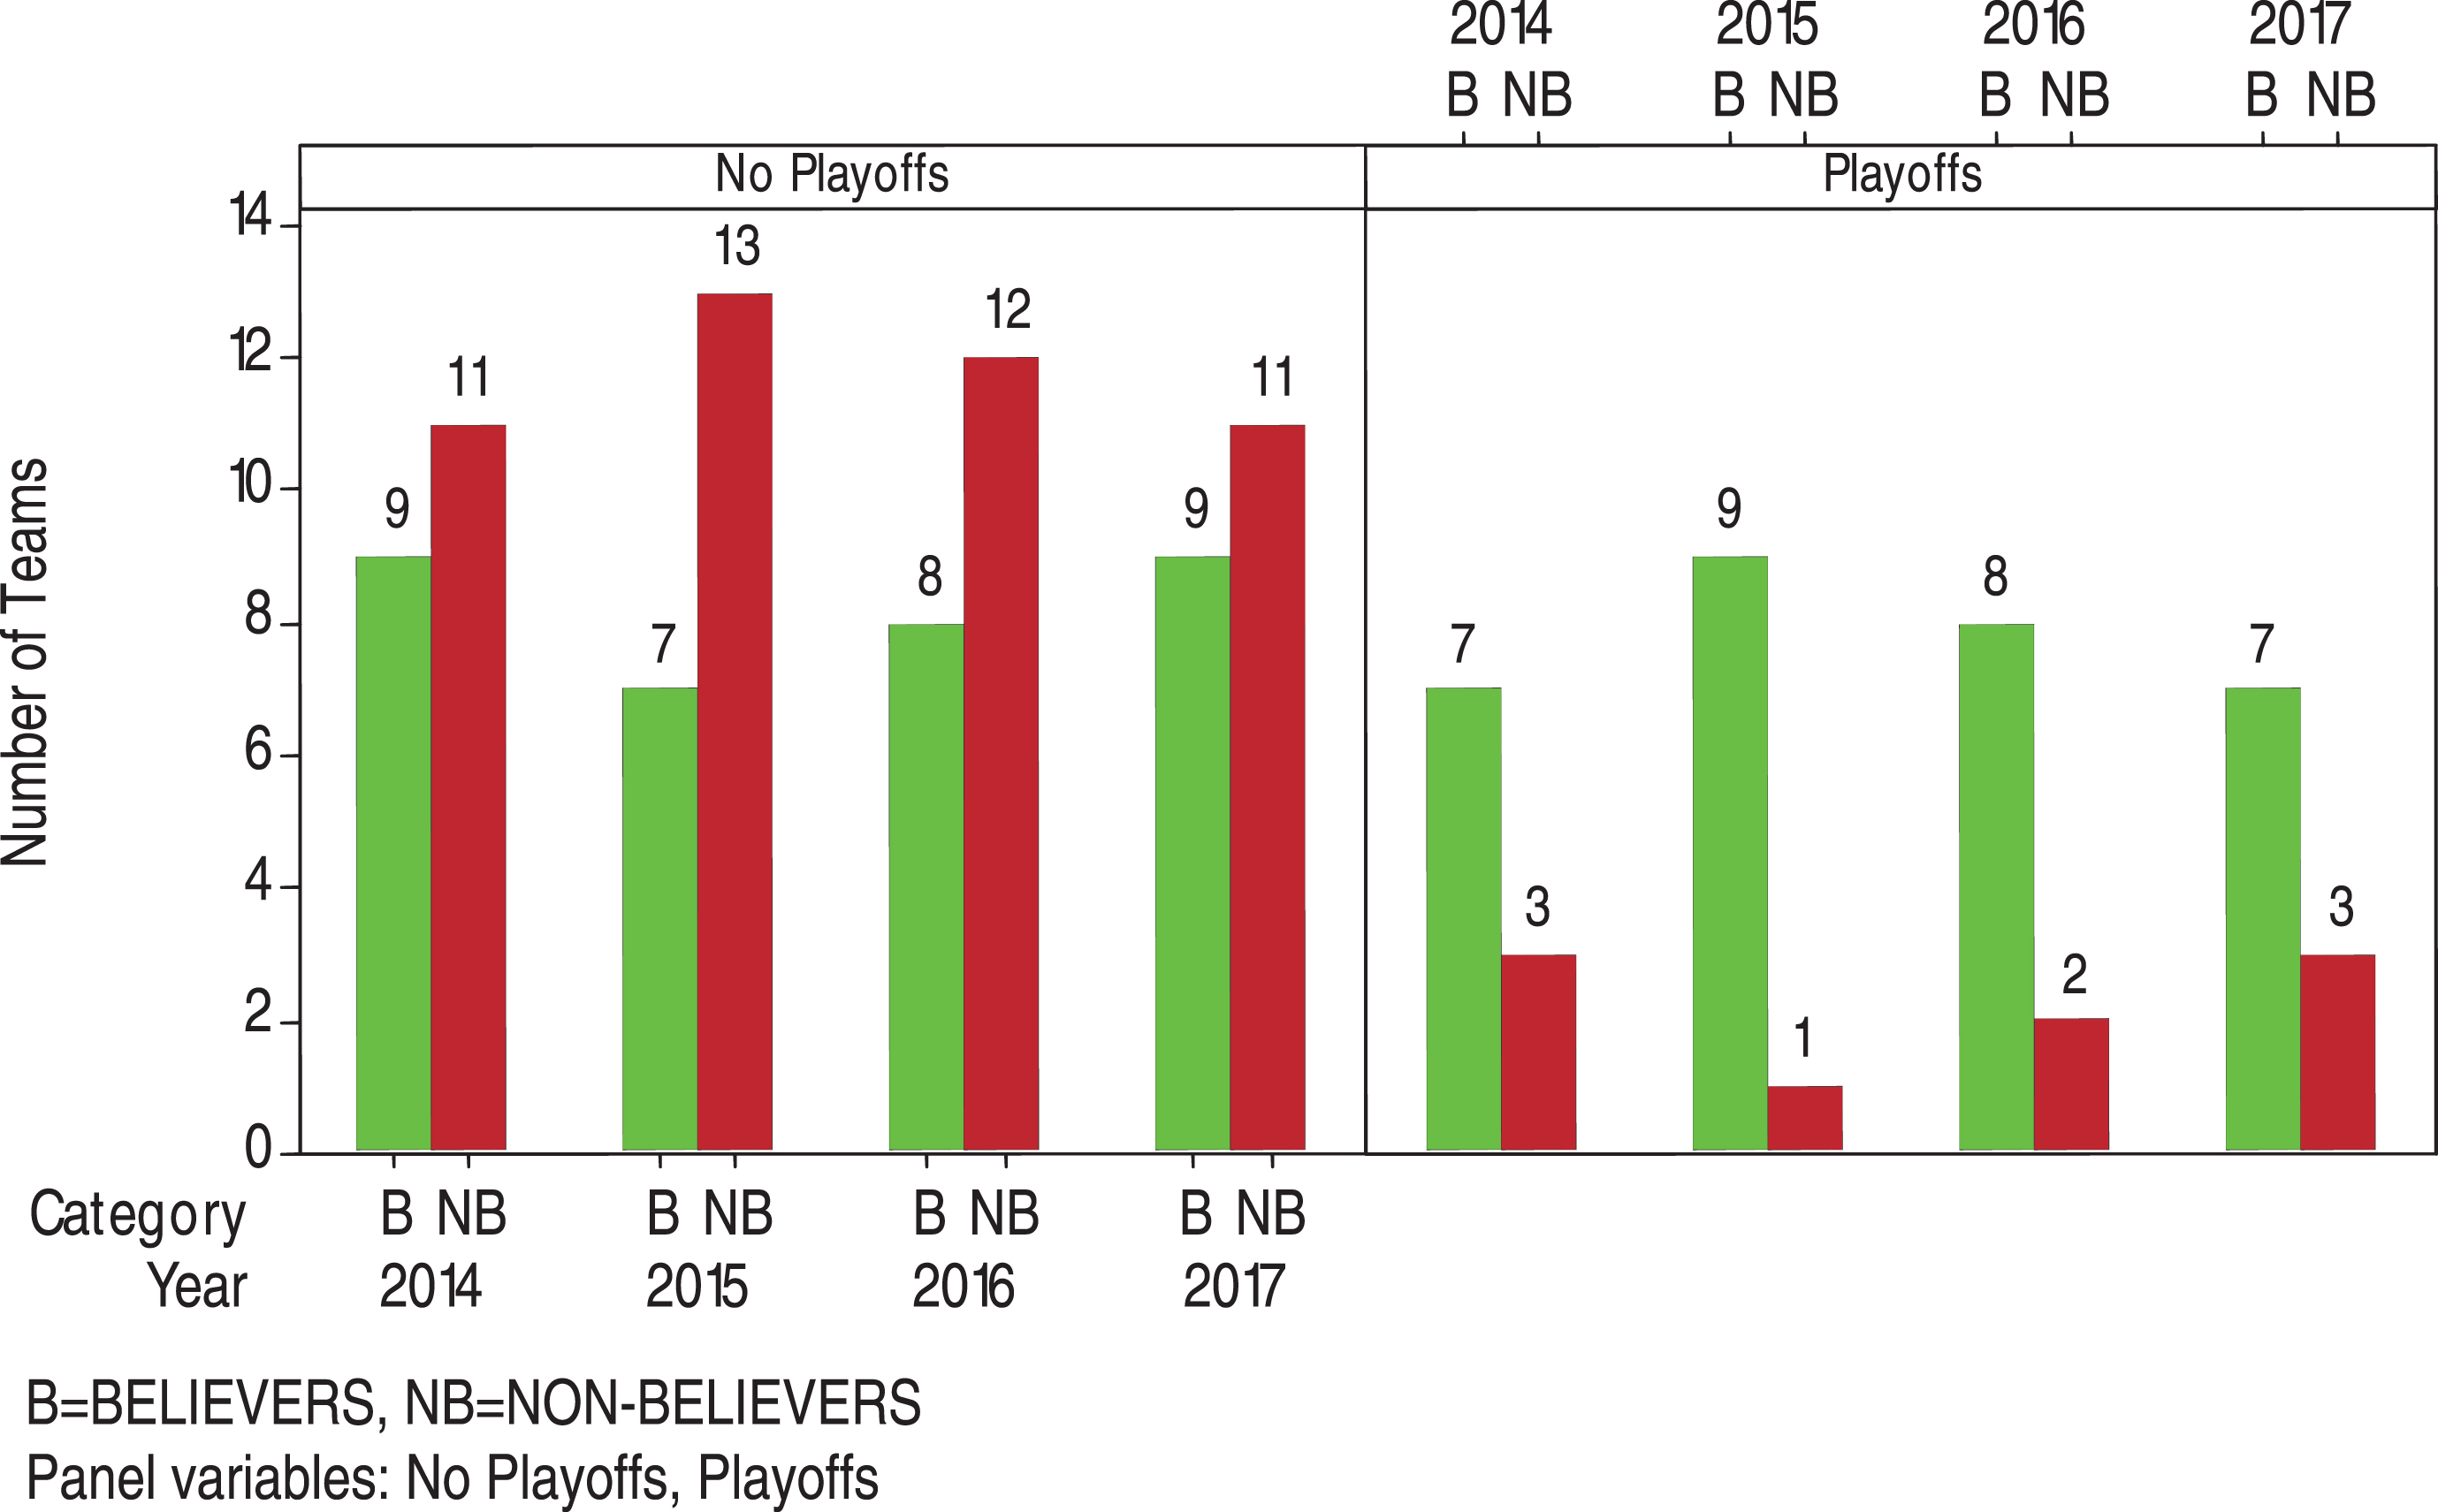 Distribution of BELIEVERS and NON-BELIEVERS teams in no playoffs and playoffs for 2014-2017.